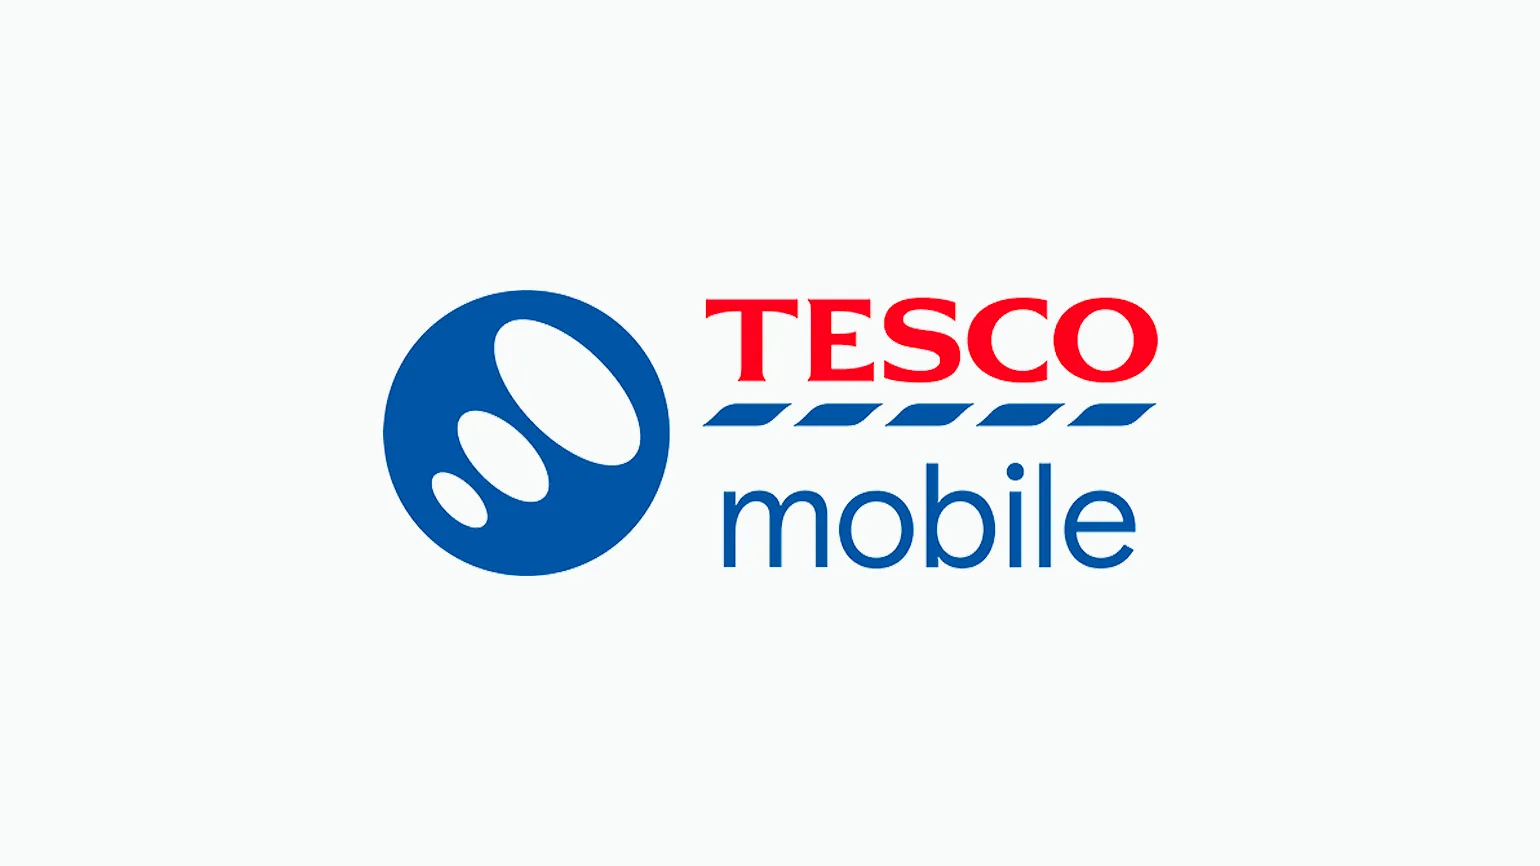 Tesco Mobile achieves 5th place for customer satisfaction among 287 UK companies